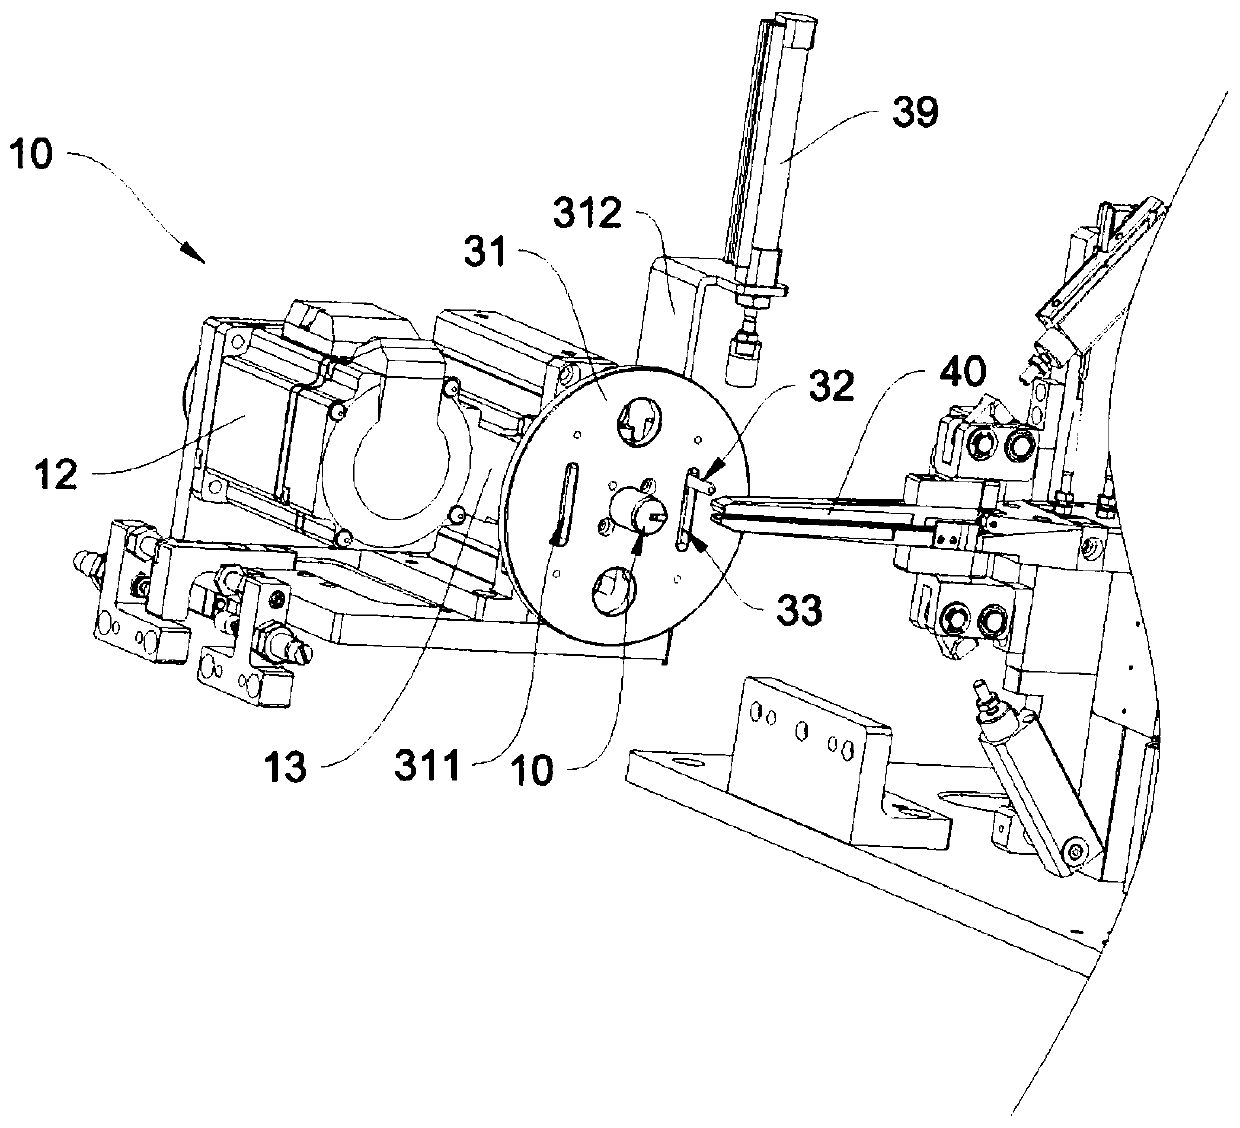 Carrier tape head end shifting and positioning mechanism for carrier tape automatic winding and collecting system